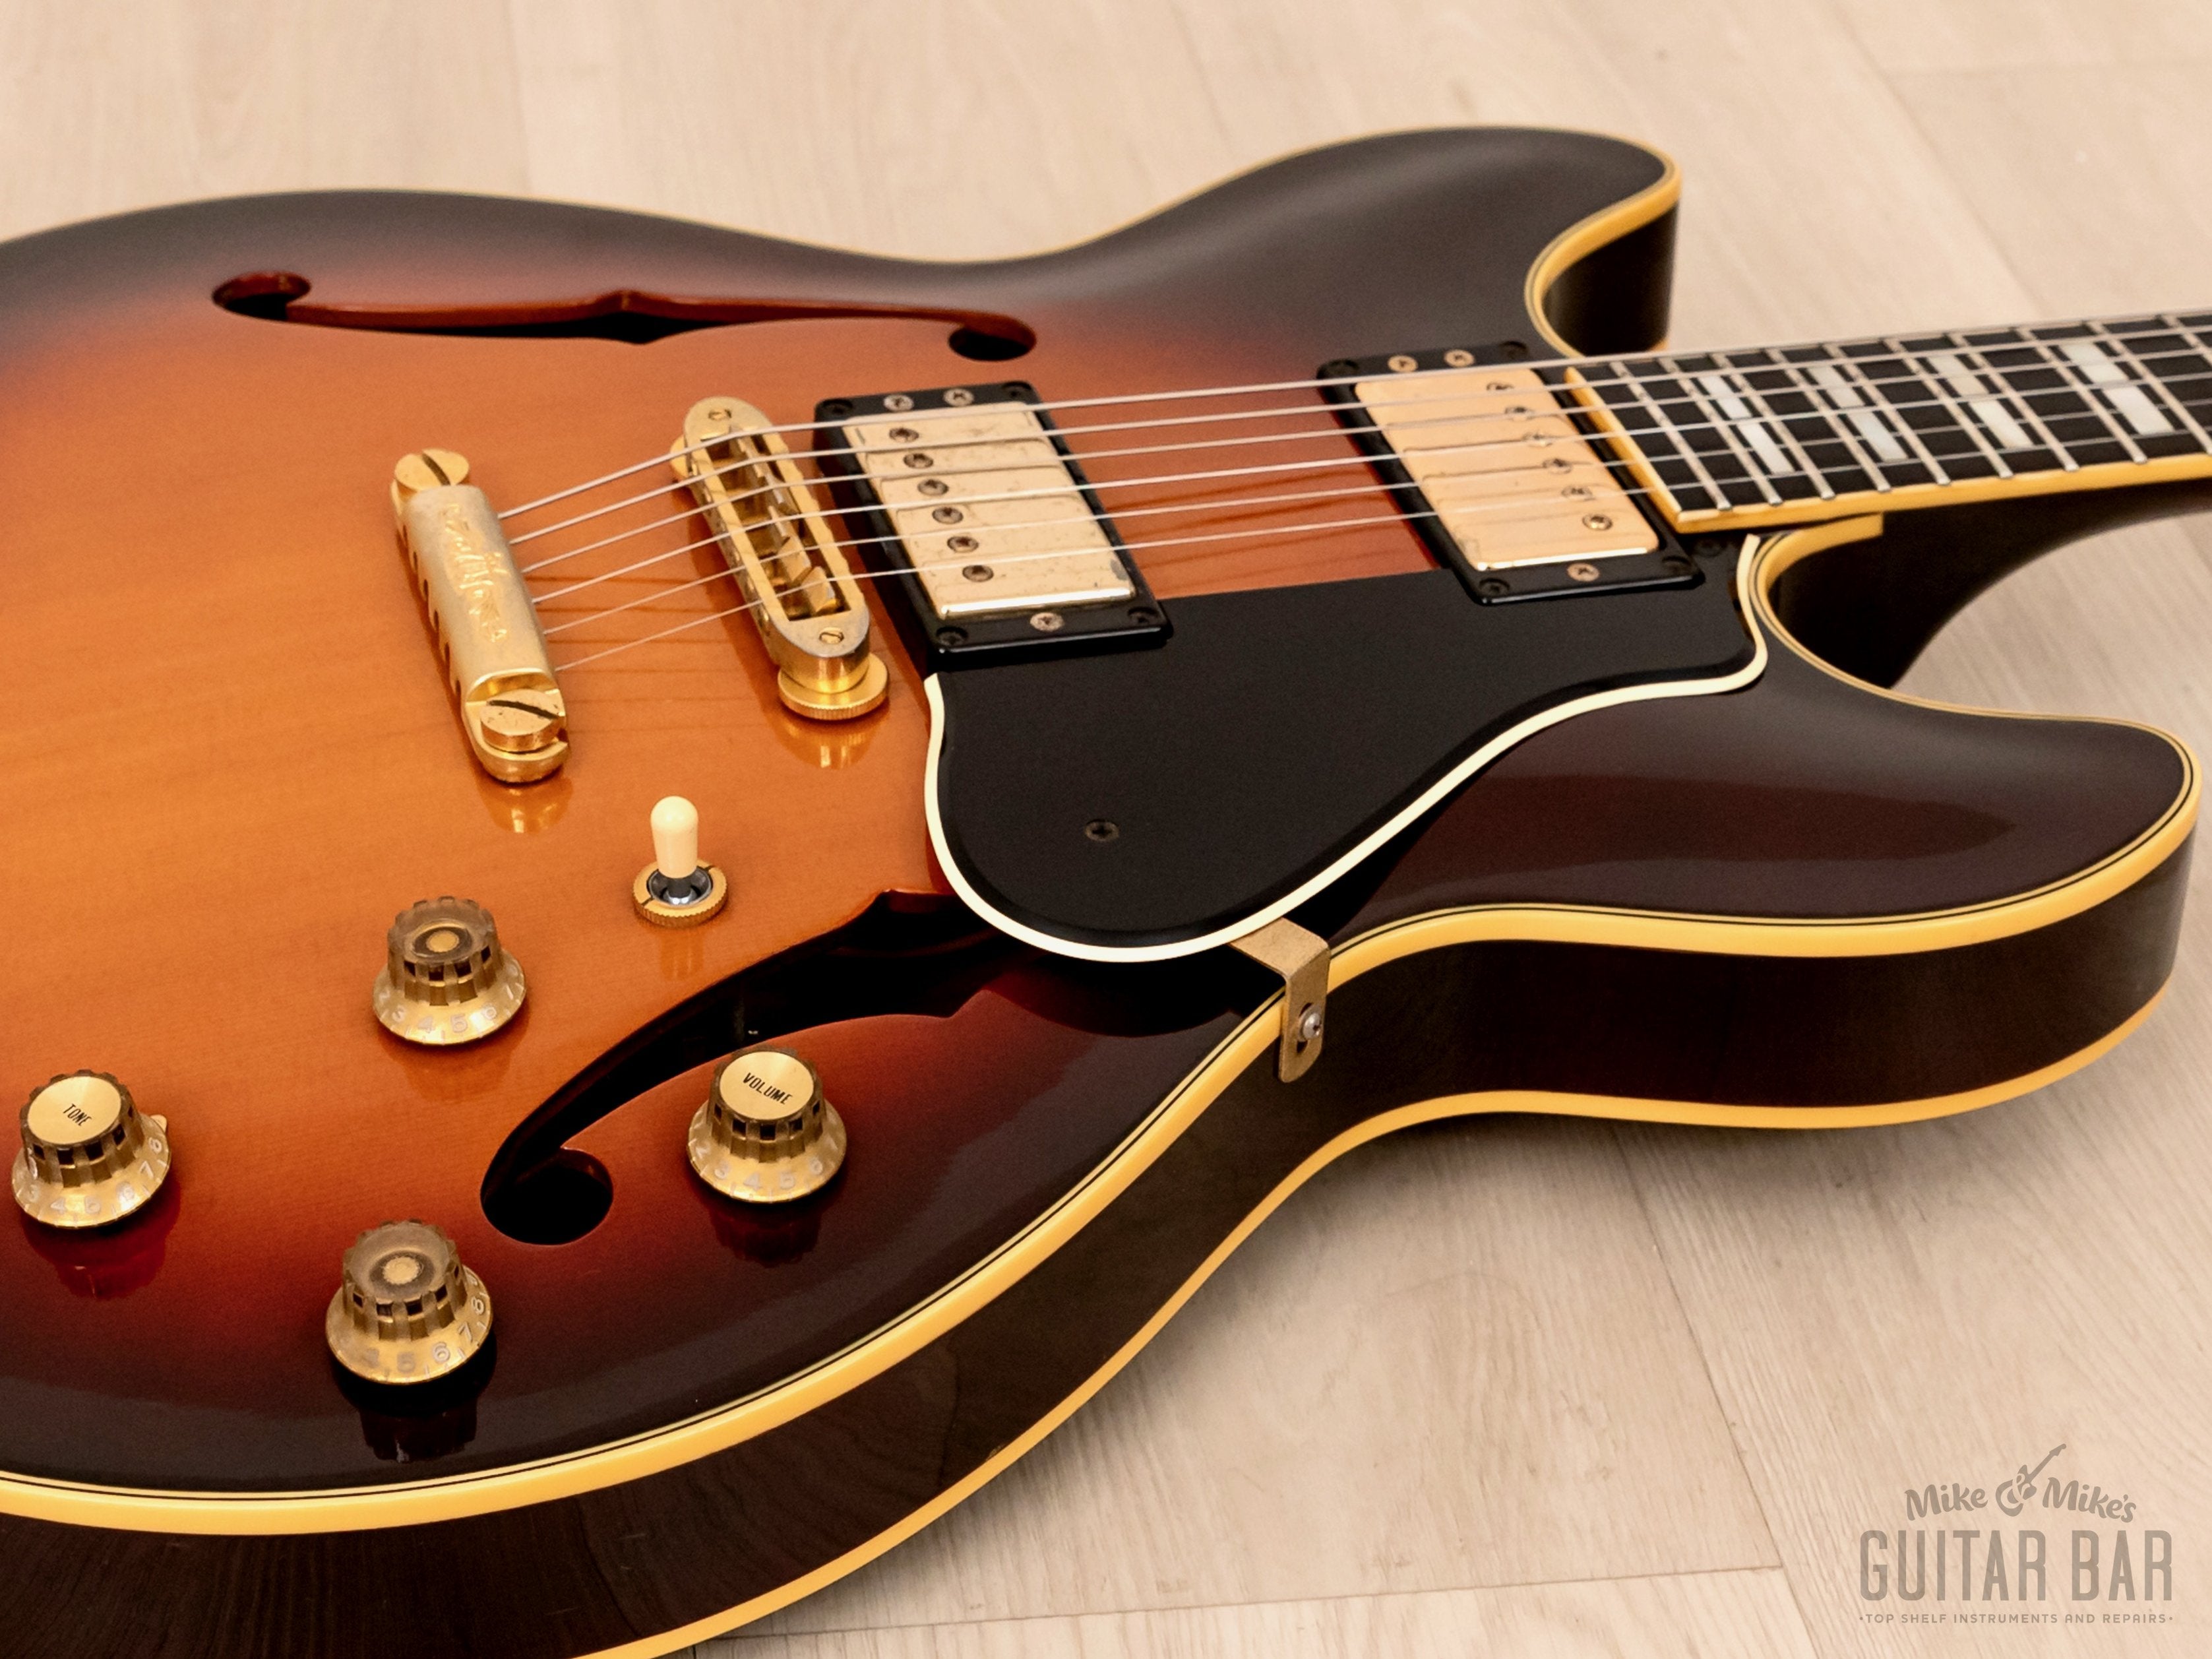 1979 Yamaha SA2000S Vintage Semi-Hollowbody ES-Style Guitar w/ Carved Spruce Top, Antique Stain